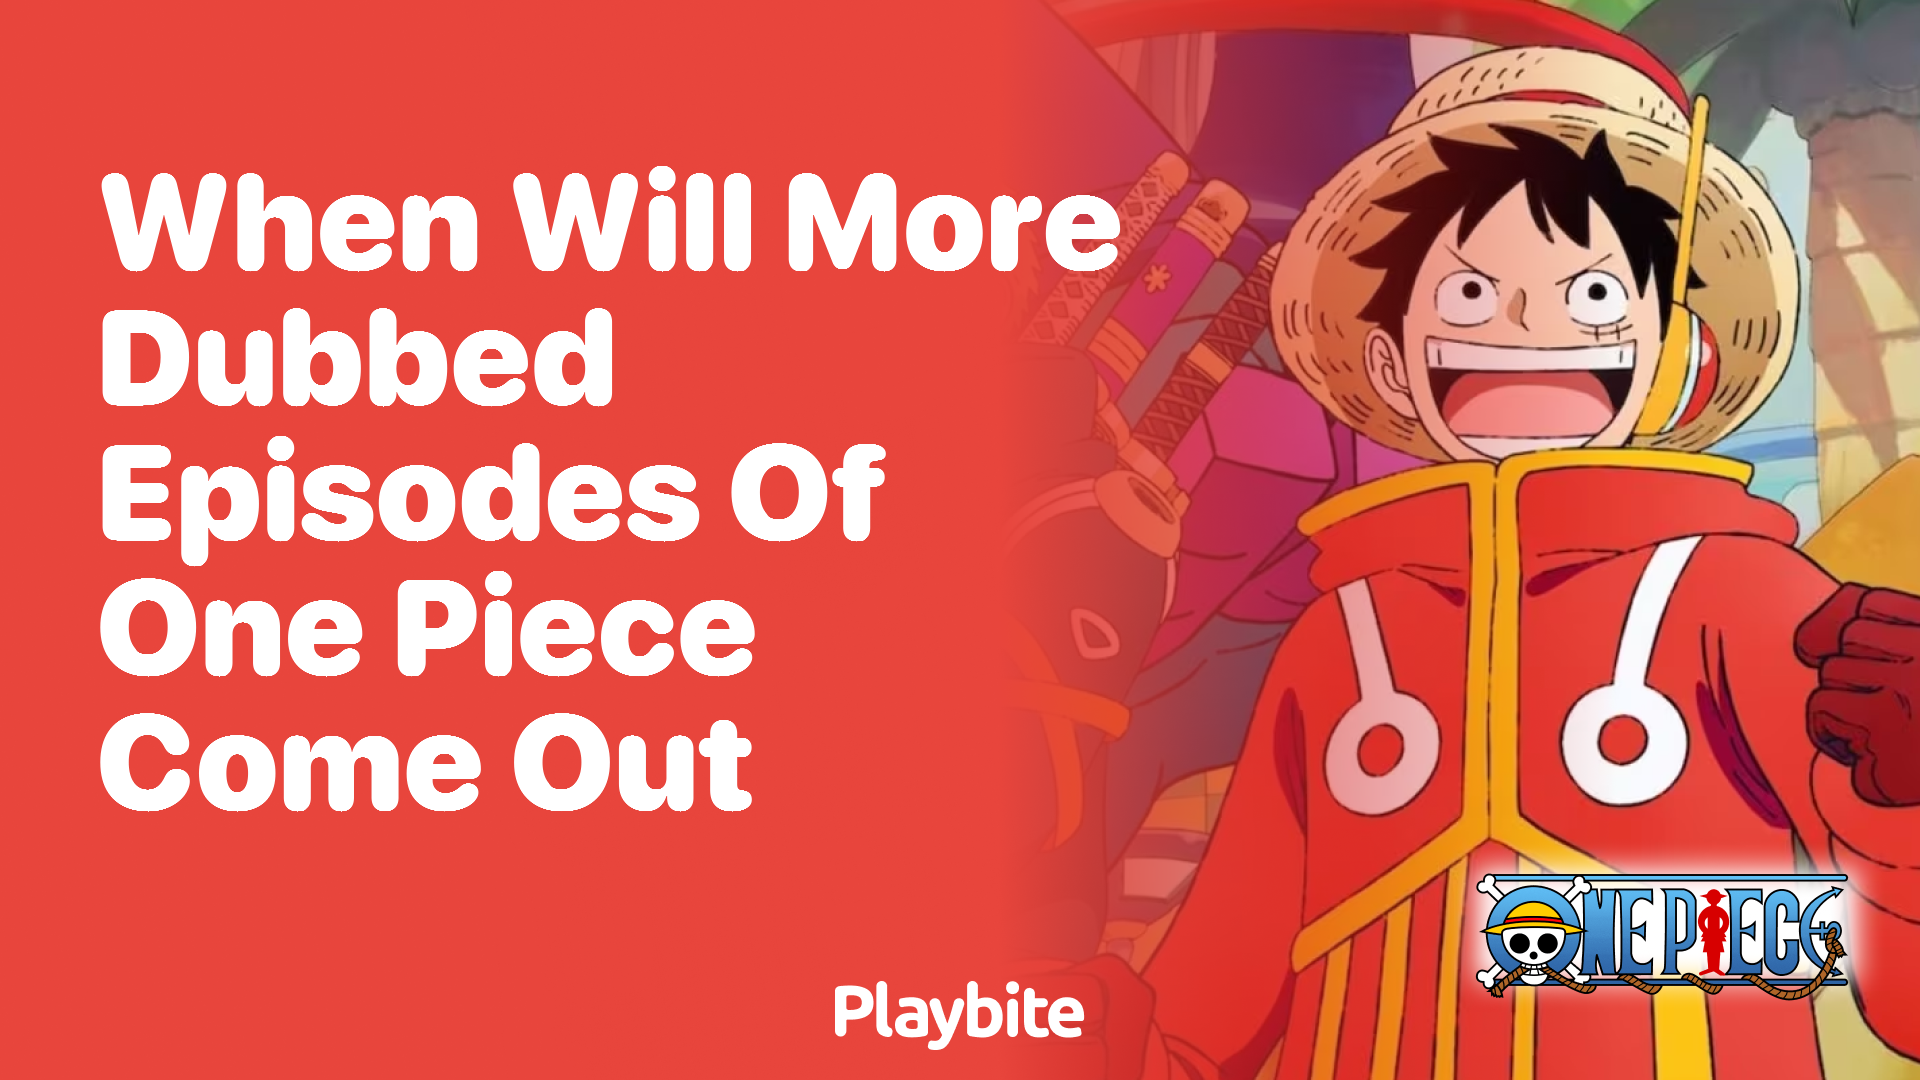 When will more dubbed episodes of One Piece come out?